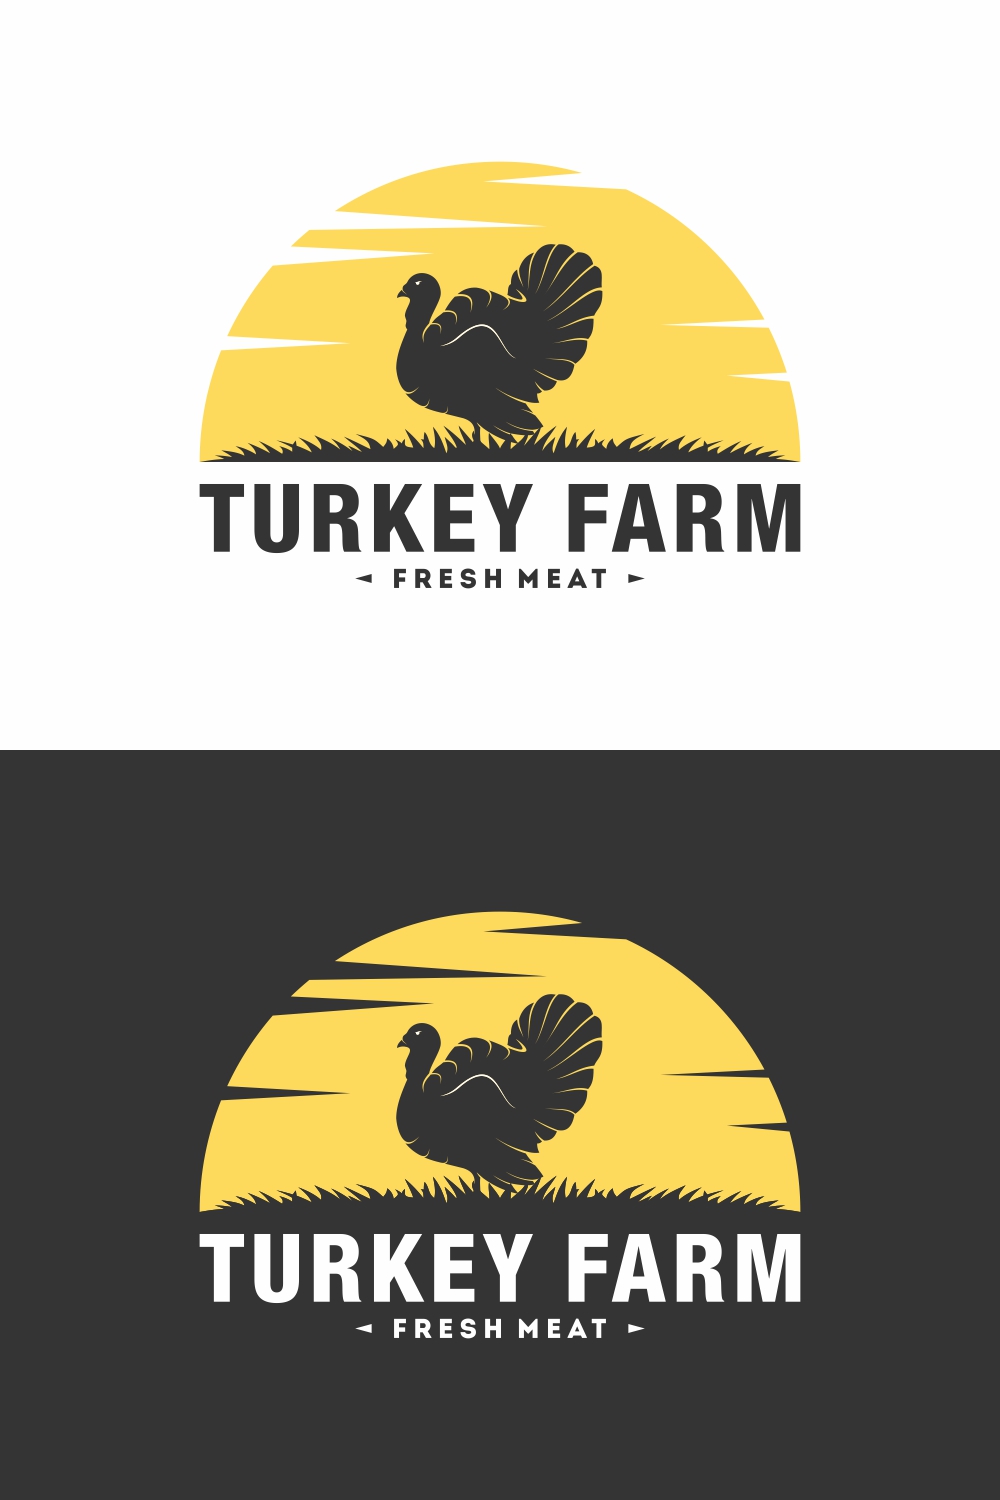 Turkey Farm logo design collection - only 10$ pinterest preview image.